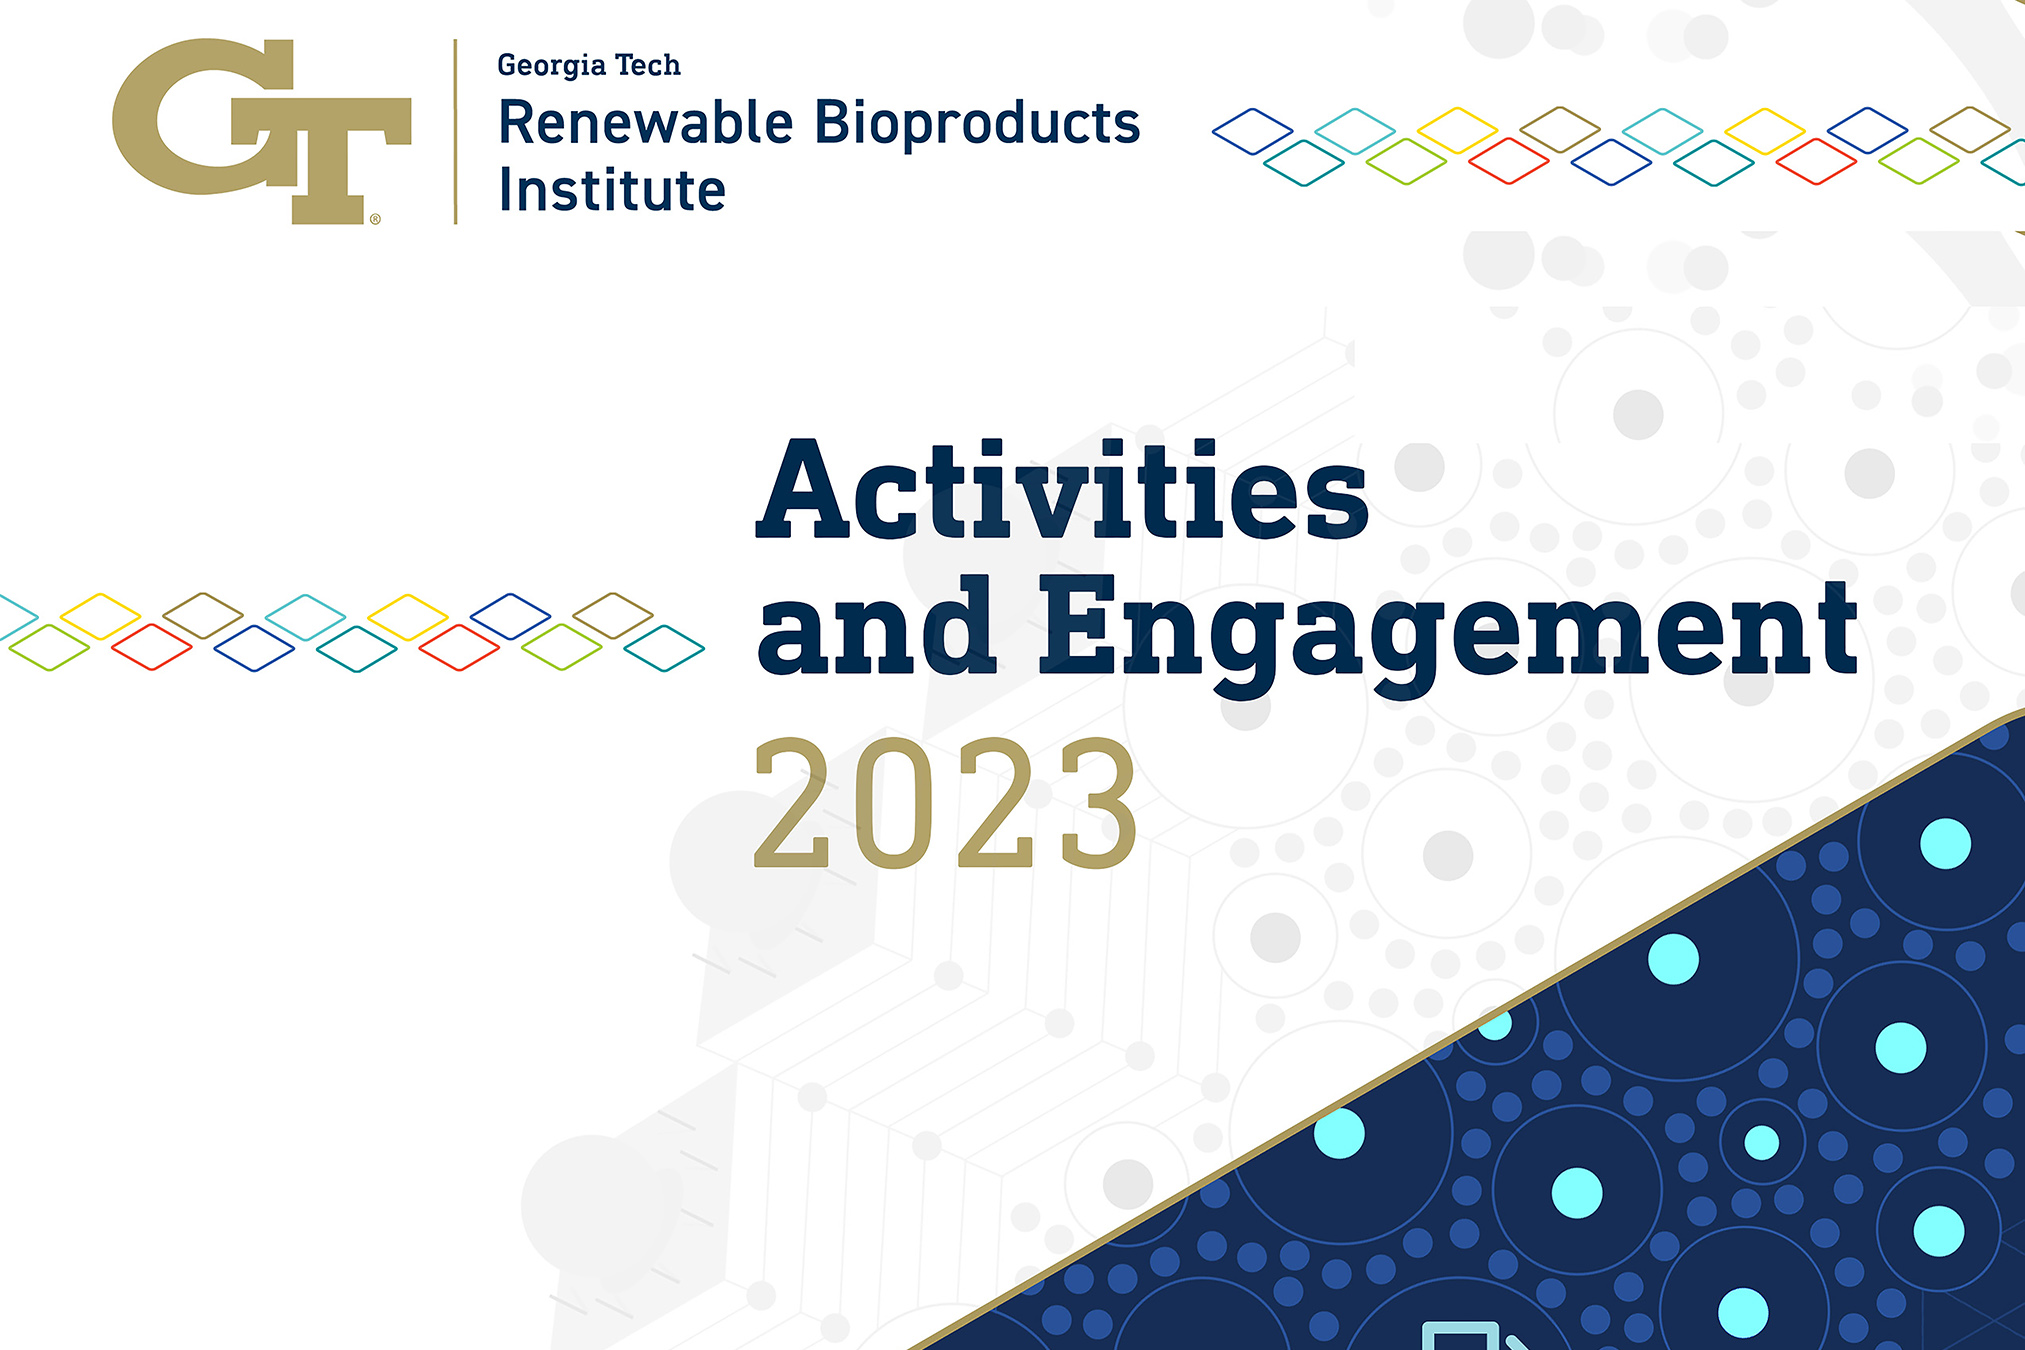 Image with RBI logo and 2023 Activities and Engagement Text